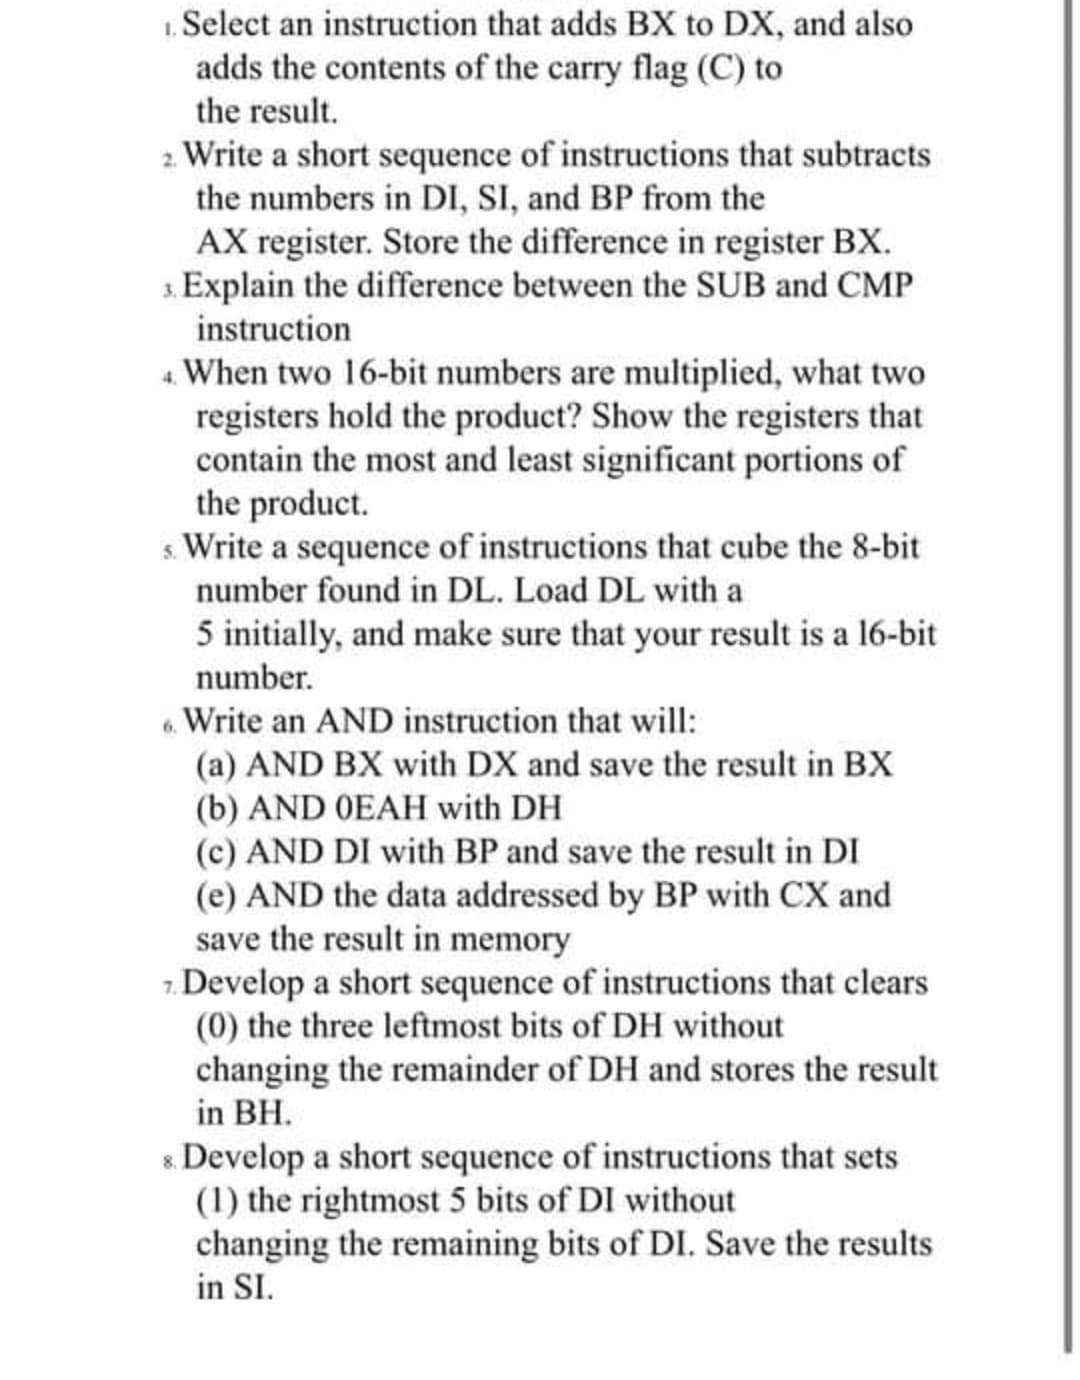 1. Select an instruction that adds BX to DX, and also
adds the contents of the carry flag (C) to
the result.
2 Write a short sequence of instructions that subtracts
the numbers in DI, SI, and BP from the
AX register. Store the difference in register BX.
3. Explain the difference between the SUB and CMP
instruction
4 When two 16-bit numbers are multiplied, what two
registers hold the product? Show the registers that
contain the most and least significant portions of
the product.
s. Write a sequence of instructions that cube the 8-bit
number found in DL. Load DL with a
5 initially, and make sure that your result is a 16-bit
number.
. Write an AND instruction that will:
(a) AND BX with DX and save the result in BX
(b) AND OEAH with DH
(c) AND DI with BP and save the result in DI
(e) AND the data addressed by BP with CX and
save the result in memory
7. Develop a short sequence of instructions that clears
(0) the three leftmost bits of DH without
changing the remainder of DH and stores the result
in BH.
8. Develop a short sequence of instructions that sets
(1) the rightmost 5 bits of DI without
changing the remaining bits of DI. Save the results
in SI.
